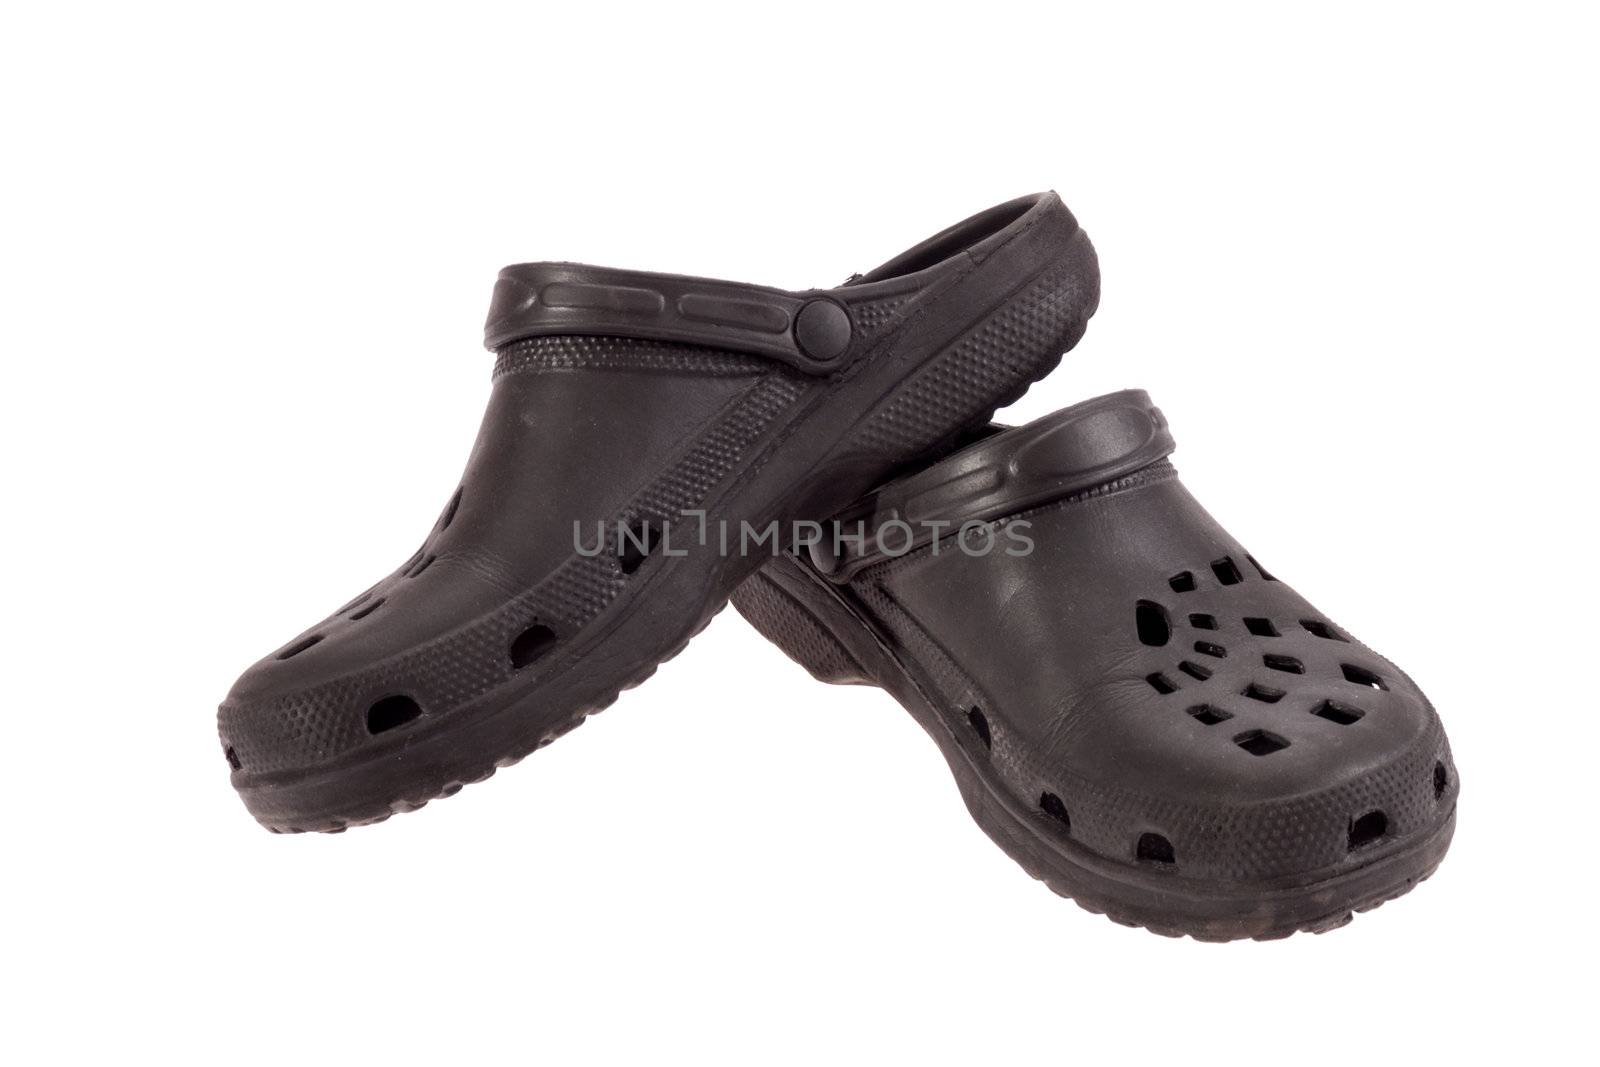 Rubber sandals, photo on the white background